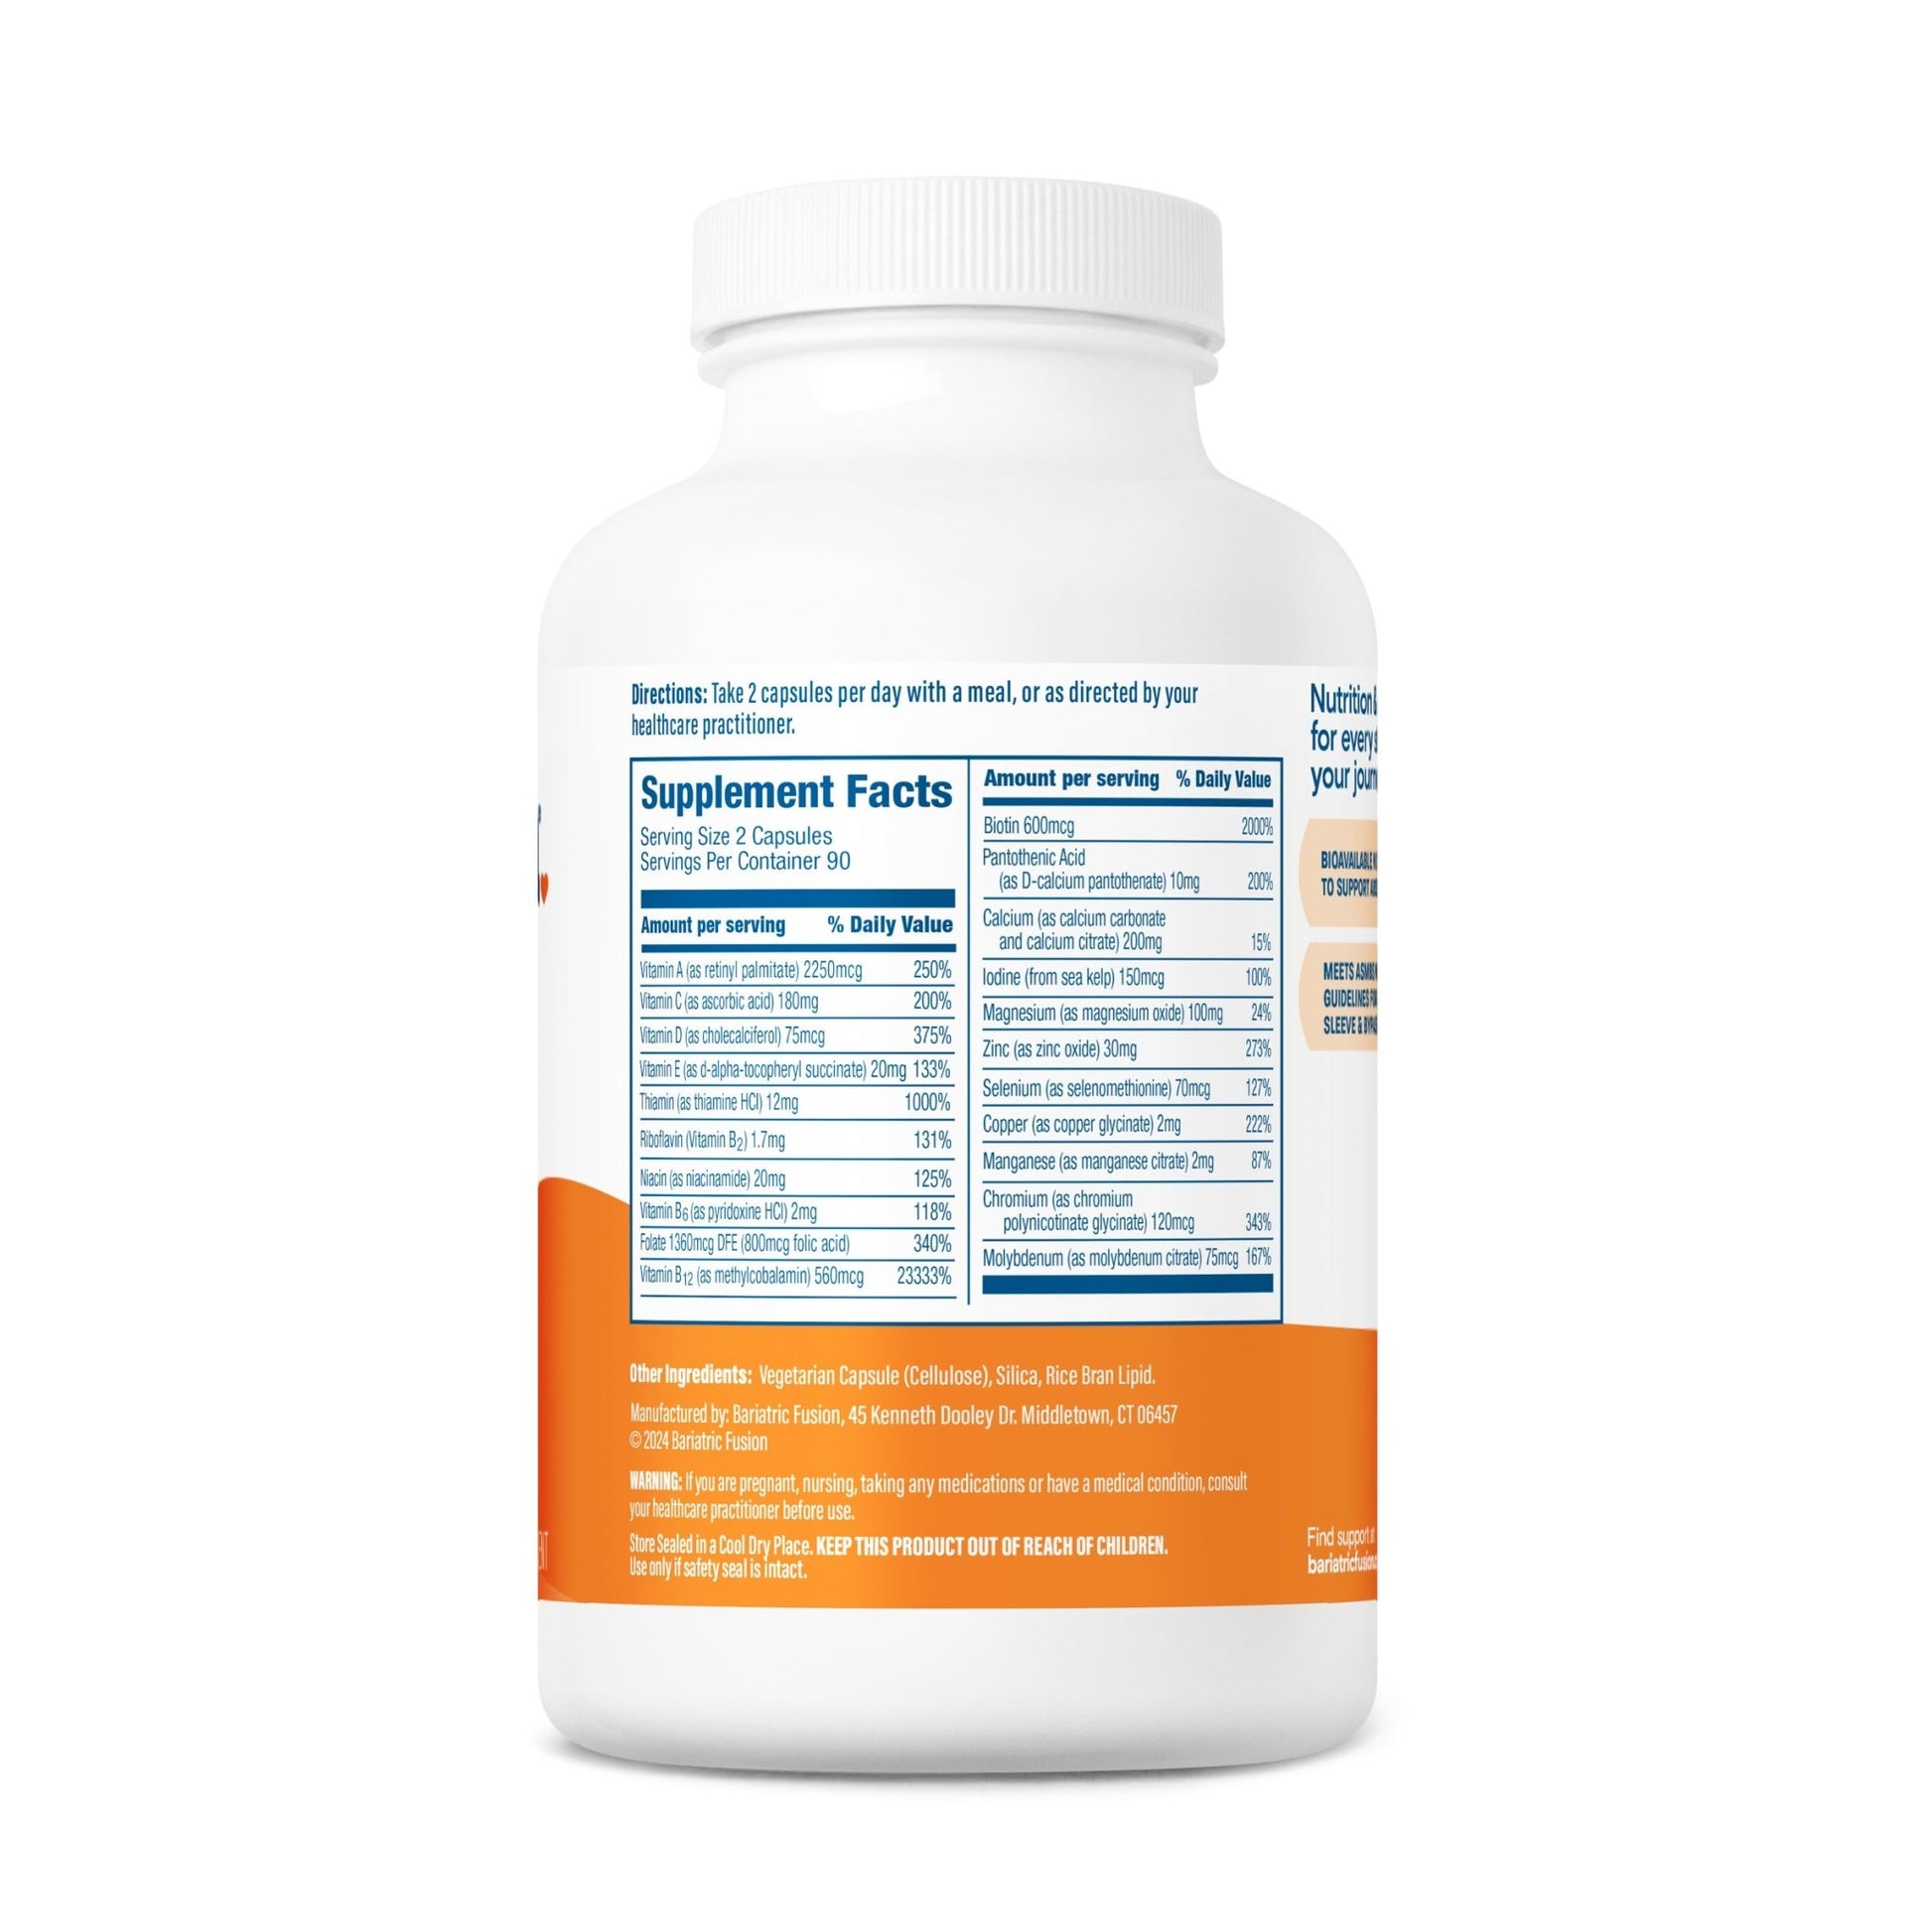 Bariatric Multivitamin Capsule without Iron 180 capsules directions, servings and ingredients.